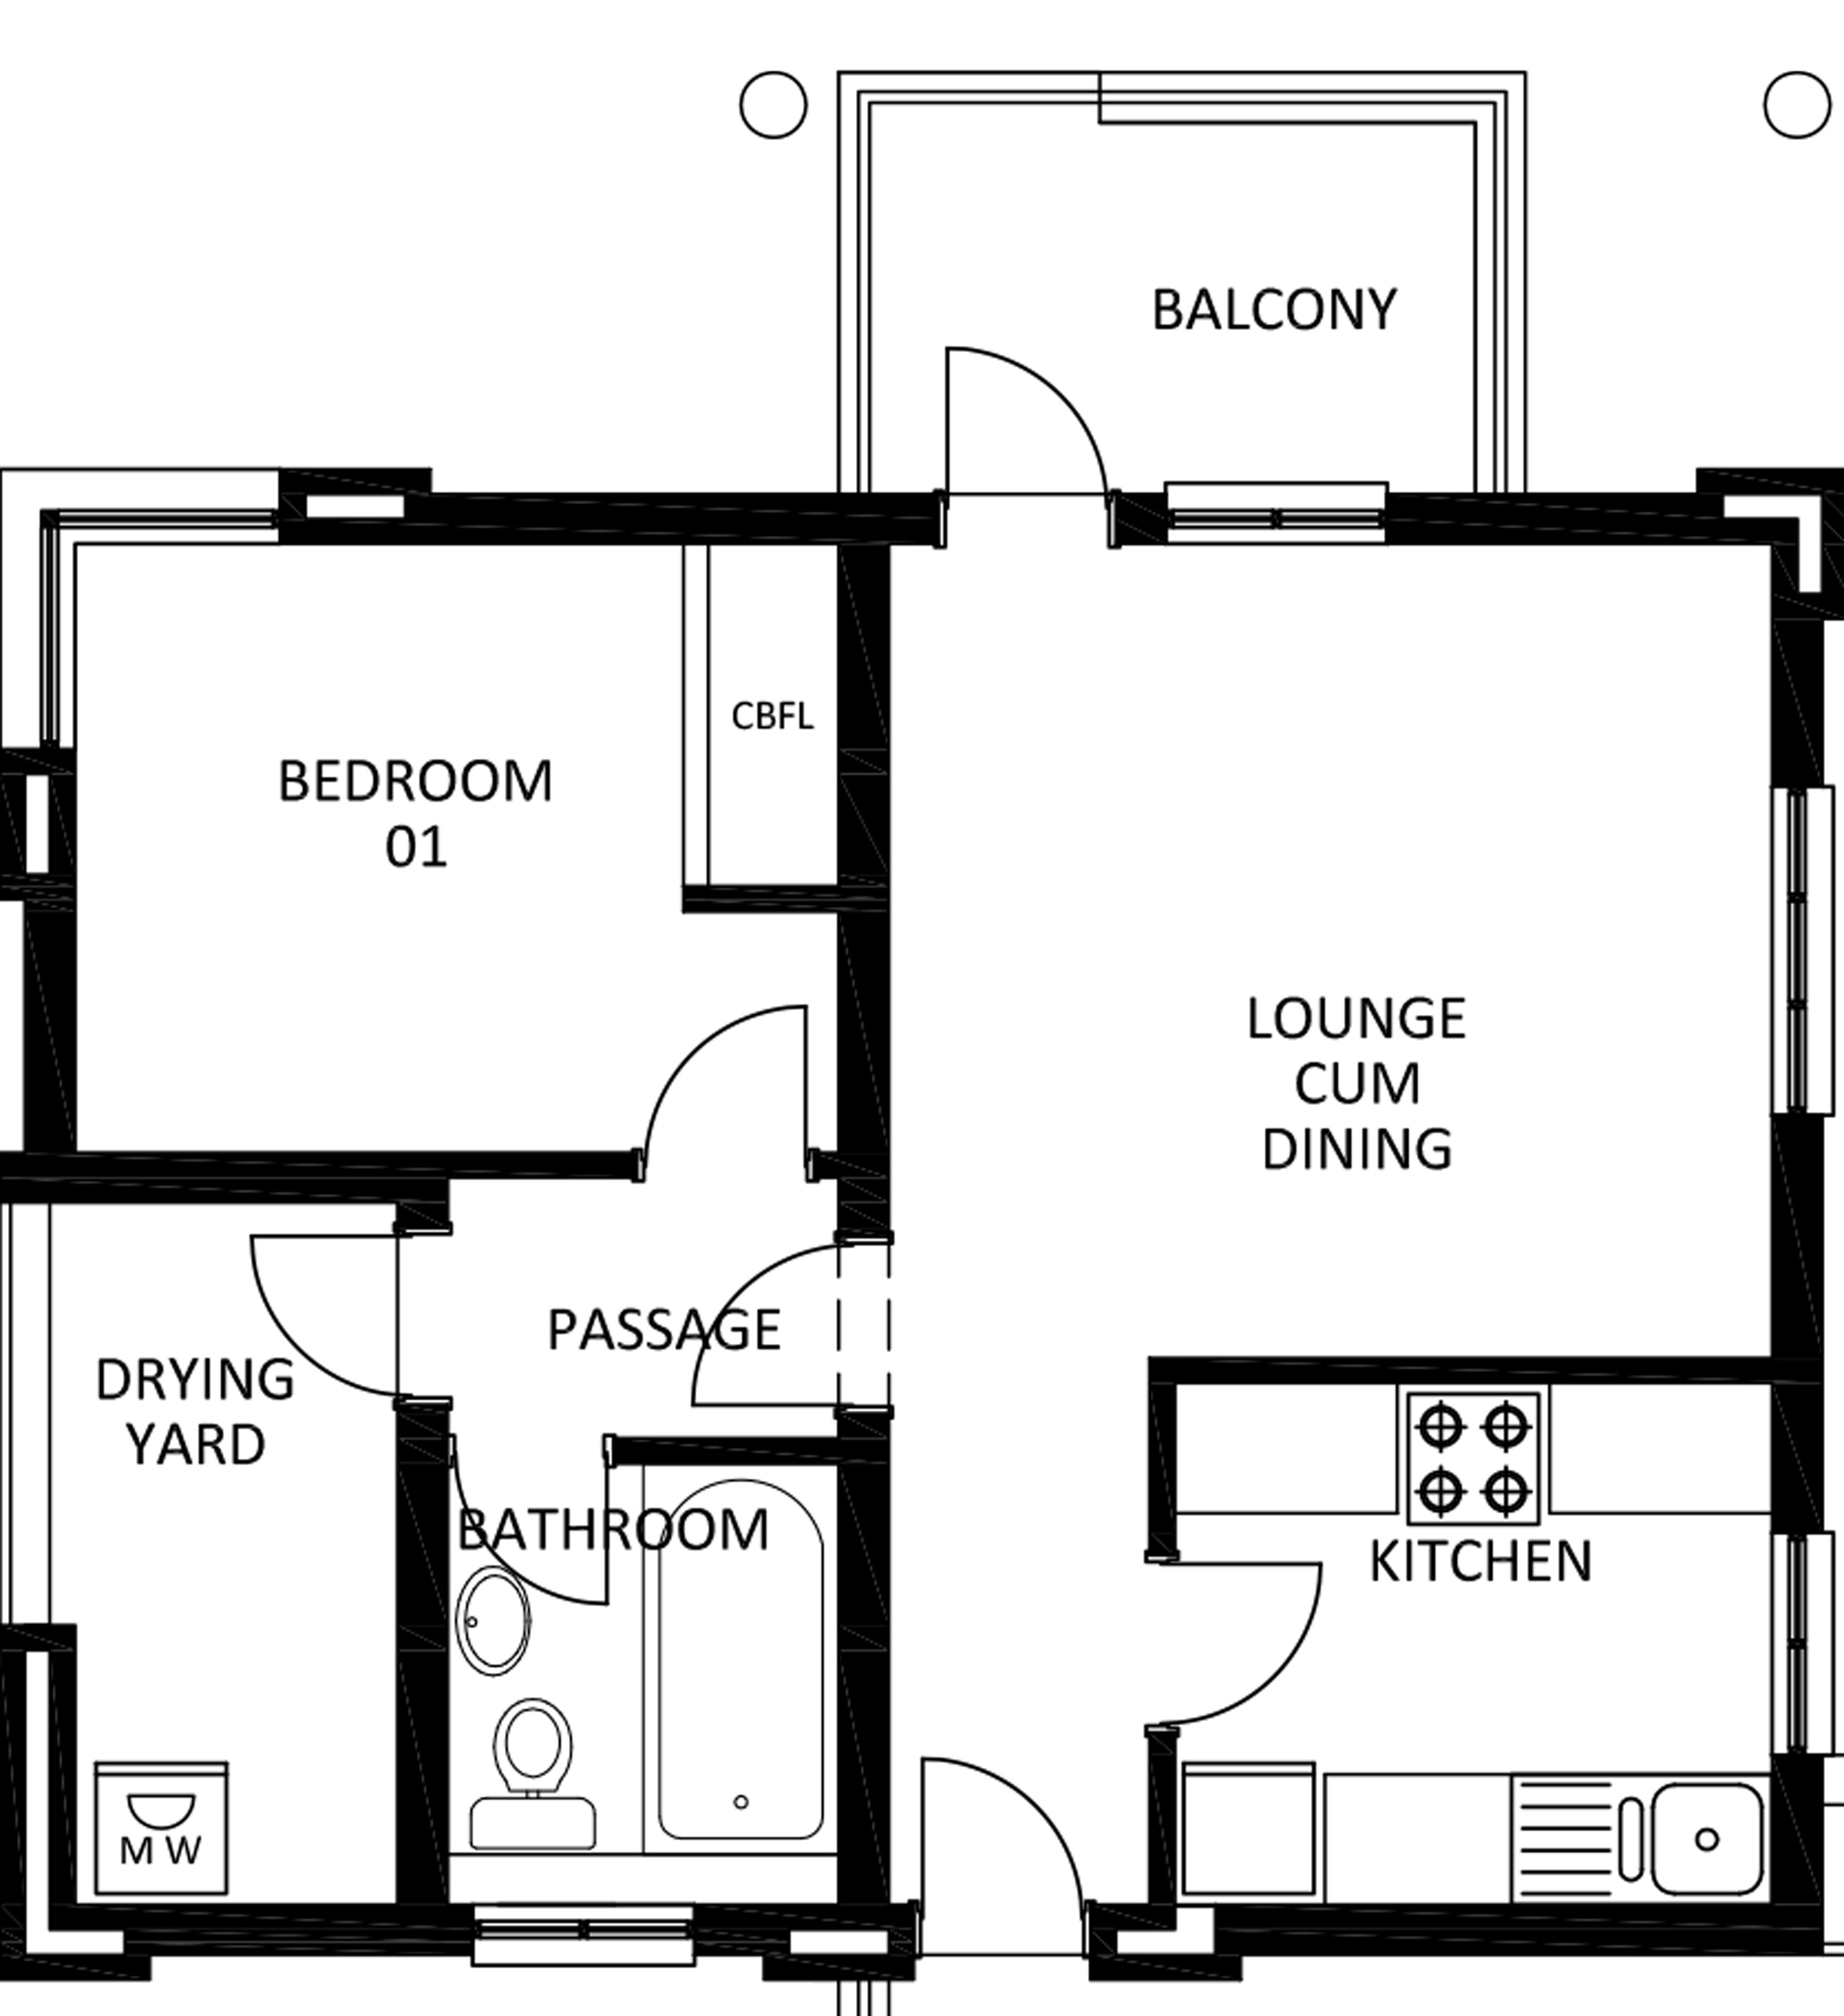 Flat (1Bed, Type A & B) BHC